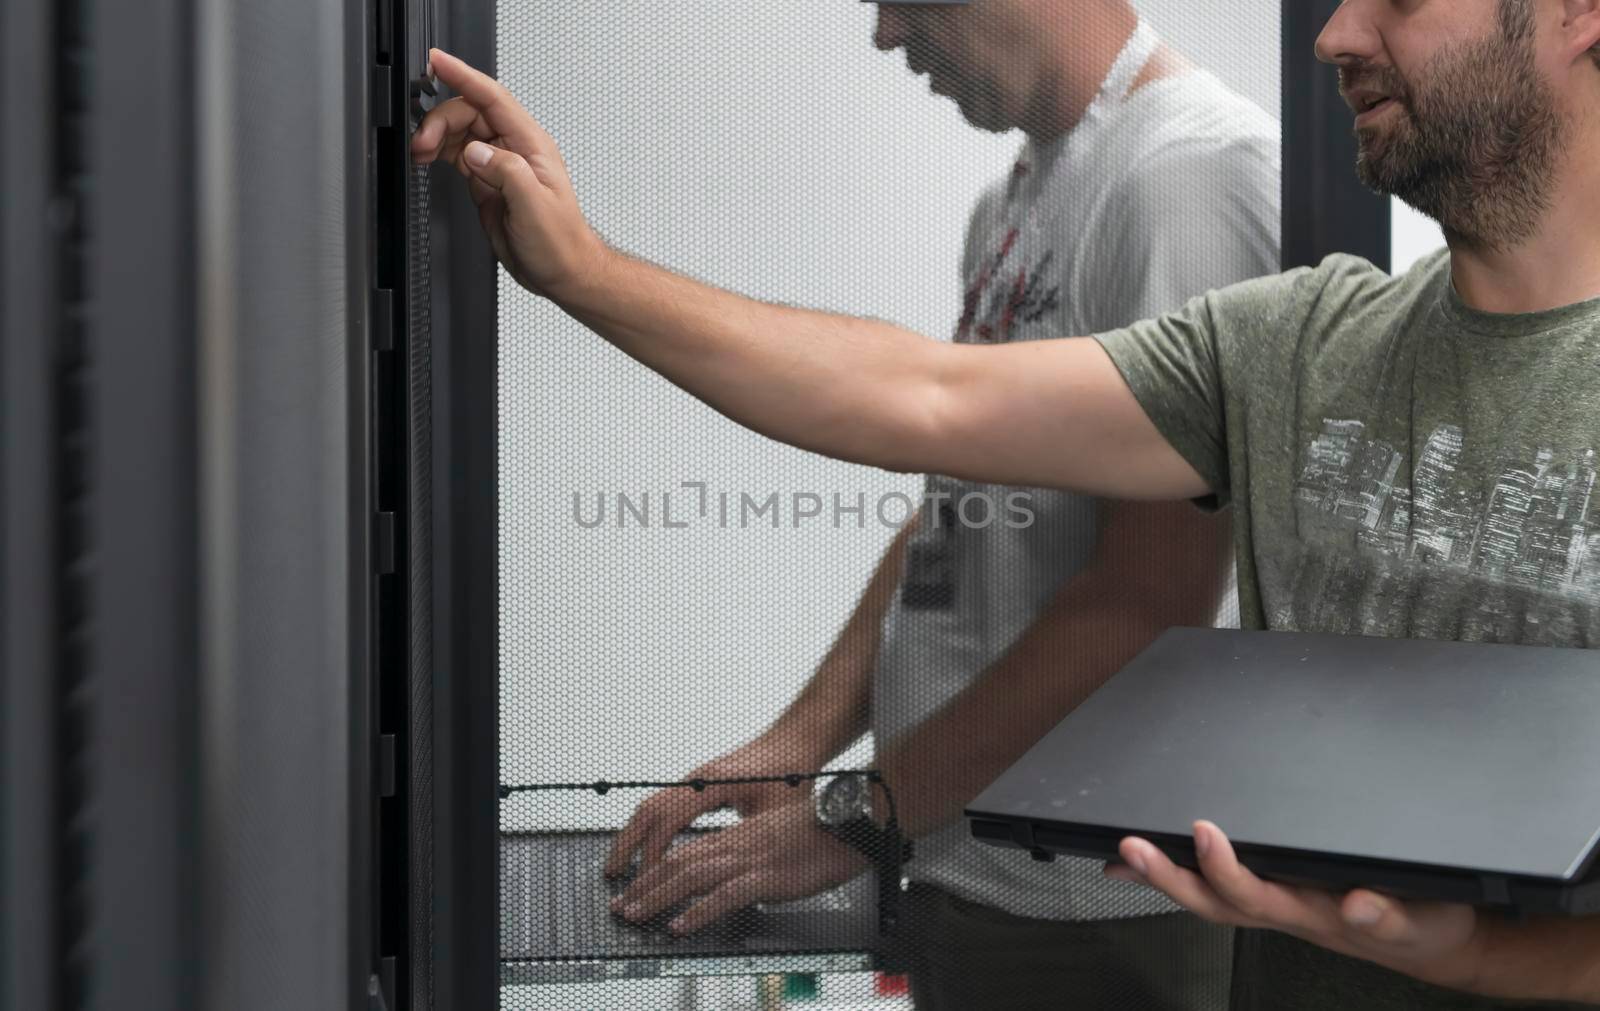 A couple of server engineers cooperate in high tech data centers. Technicians team updating hardware inspecting system performance in super computer server room or cryptocurrency mining farm.